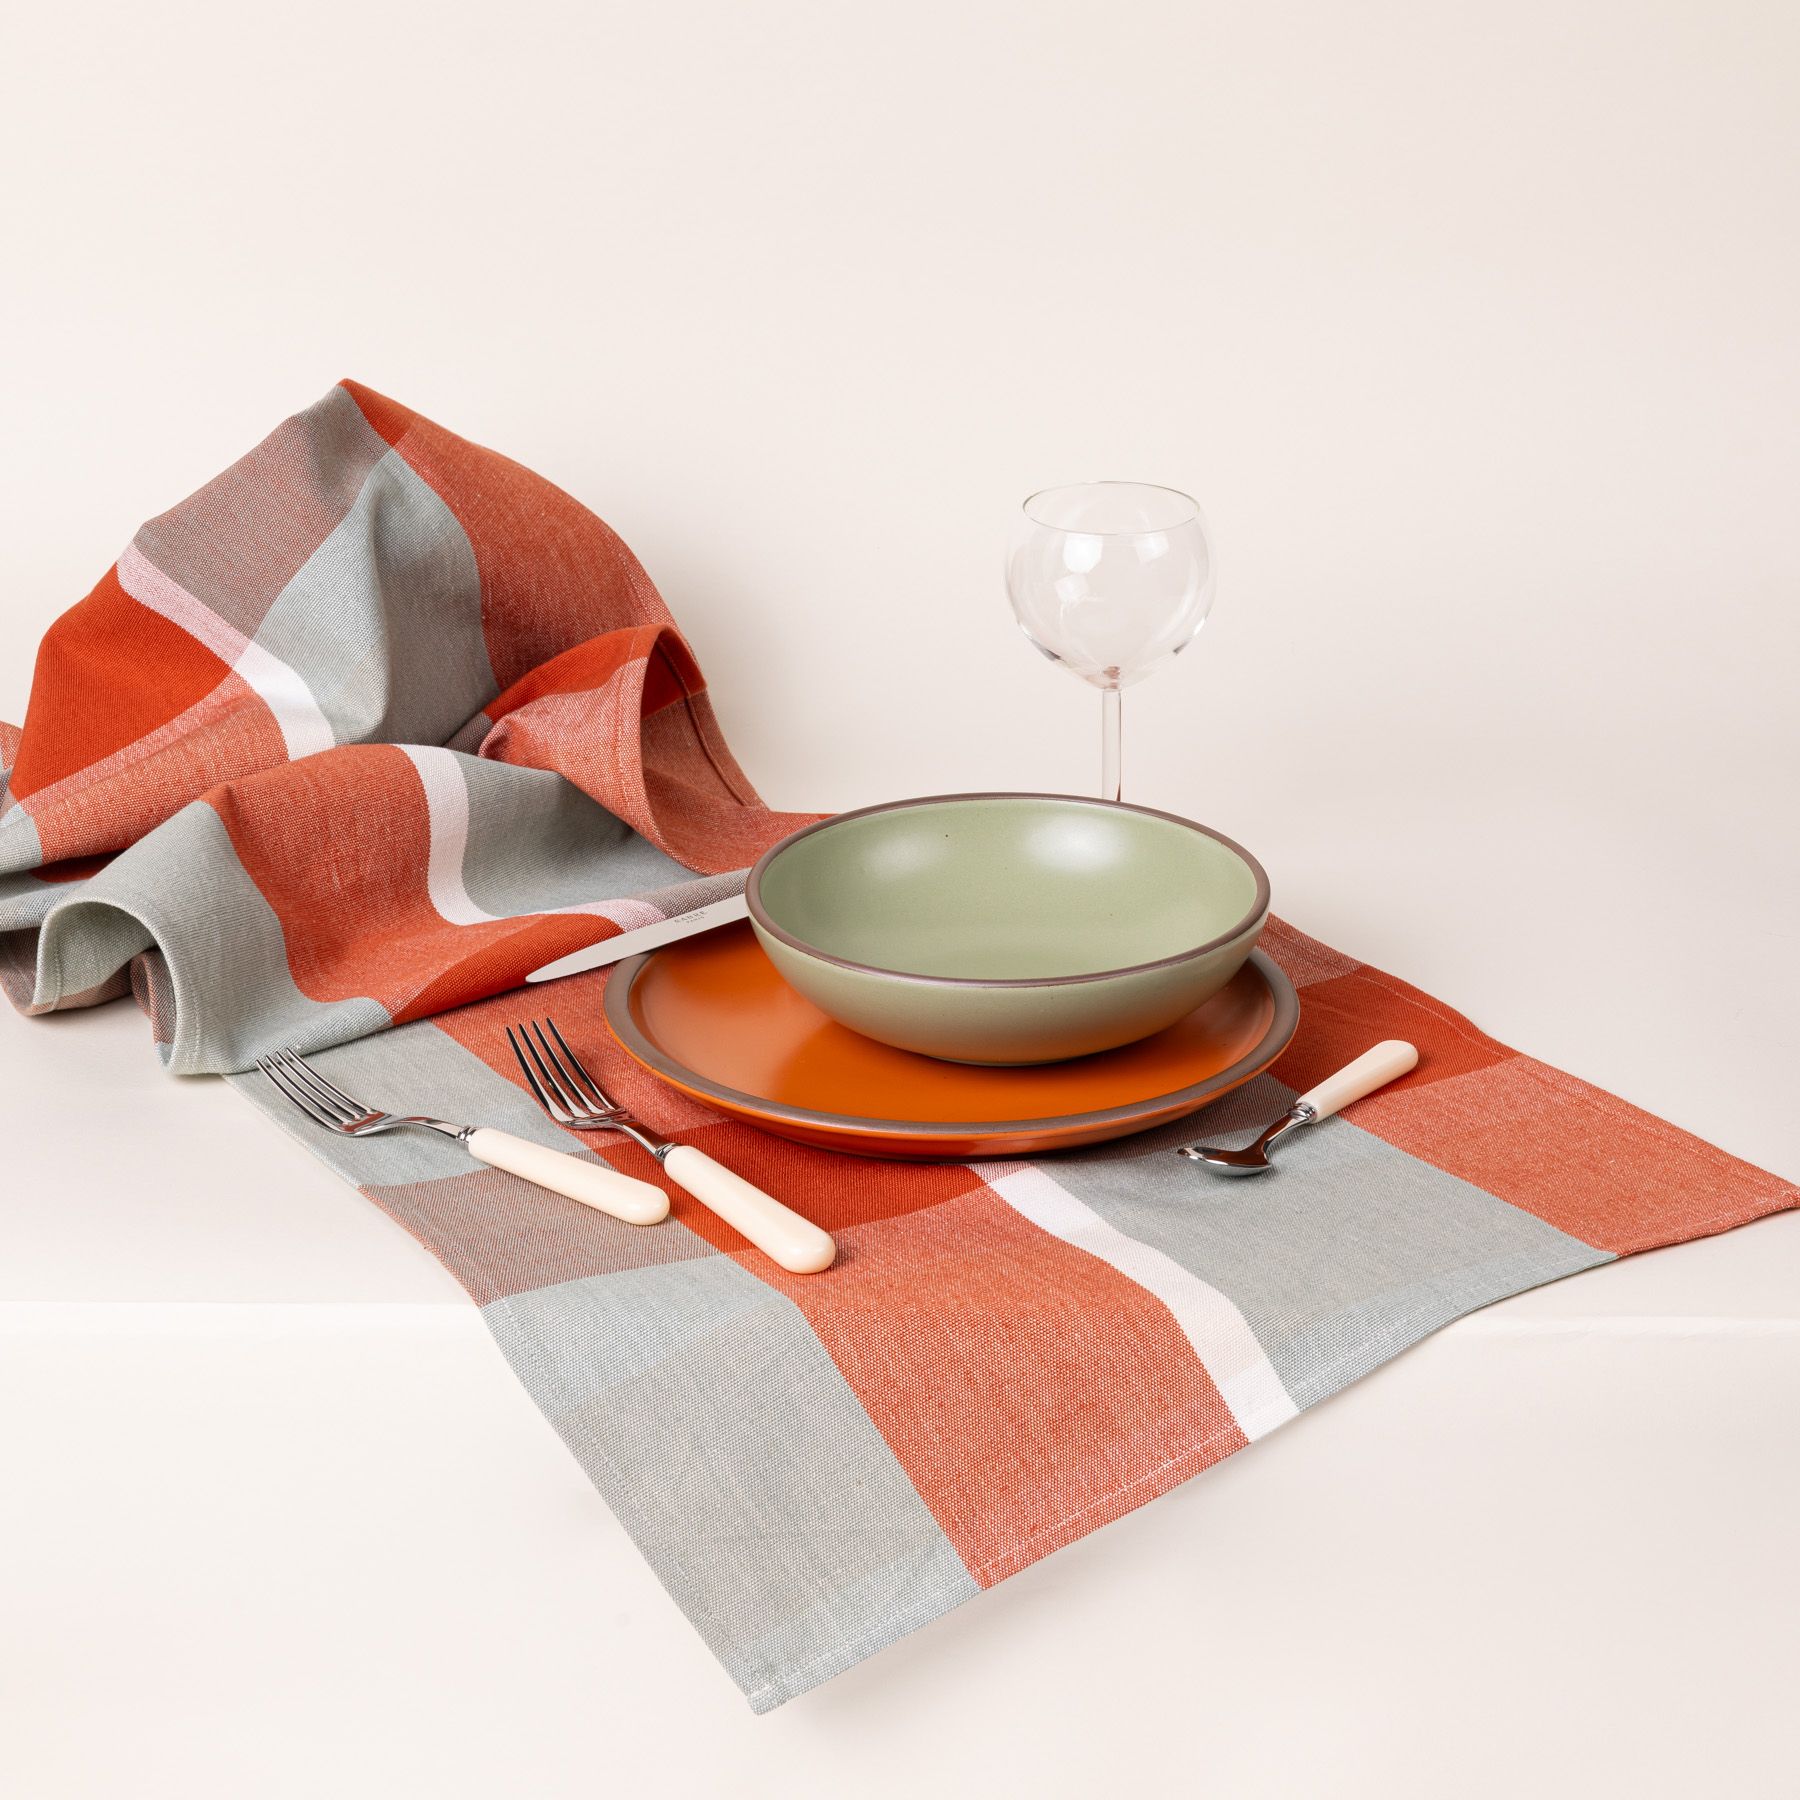 A gingham table runner featuring colors of sage green, bold orange, and cream, paired with a place setting with matching pottery and a wine glass.